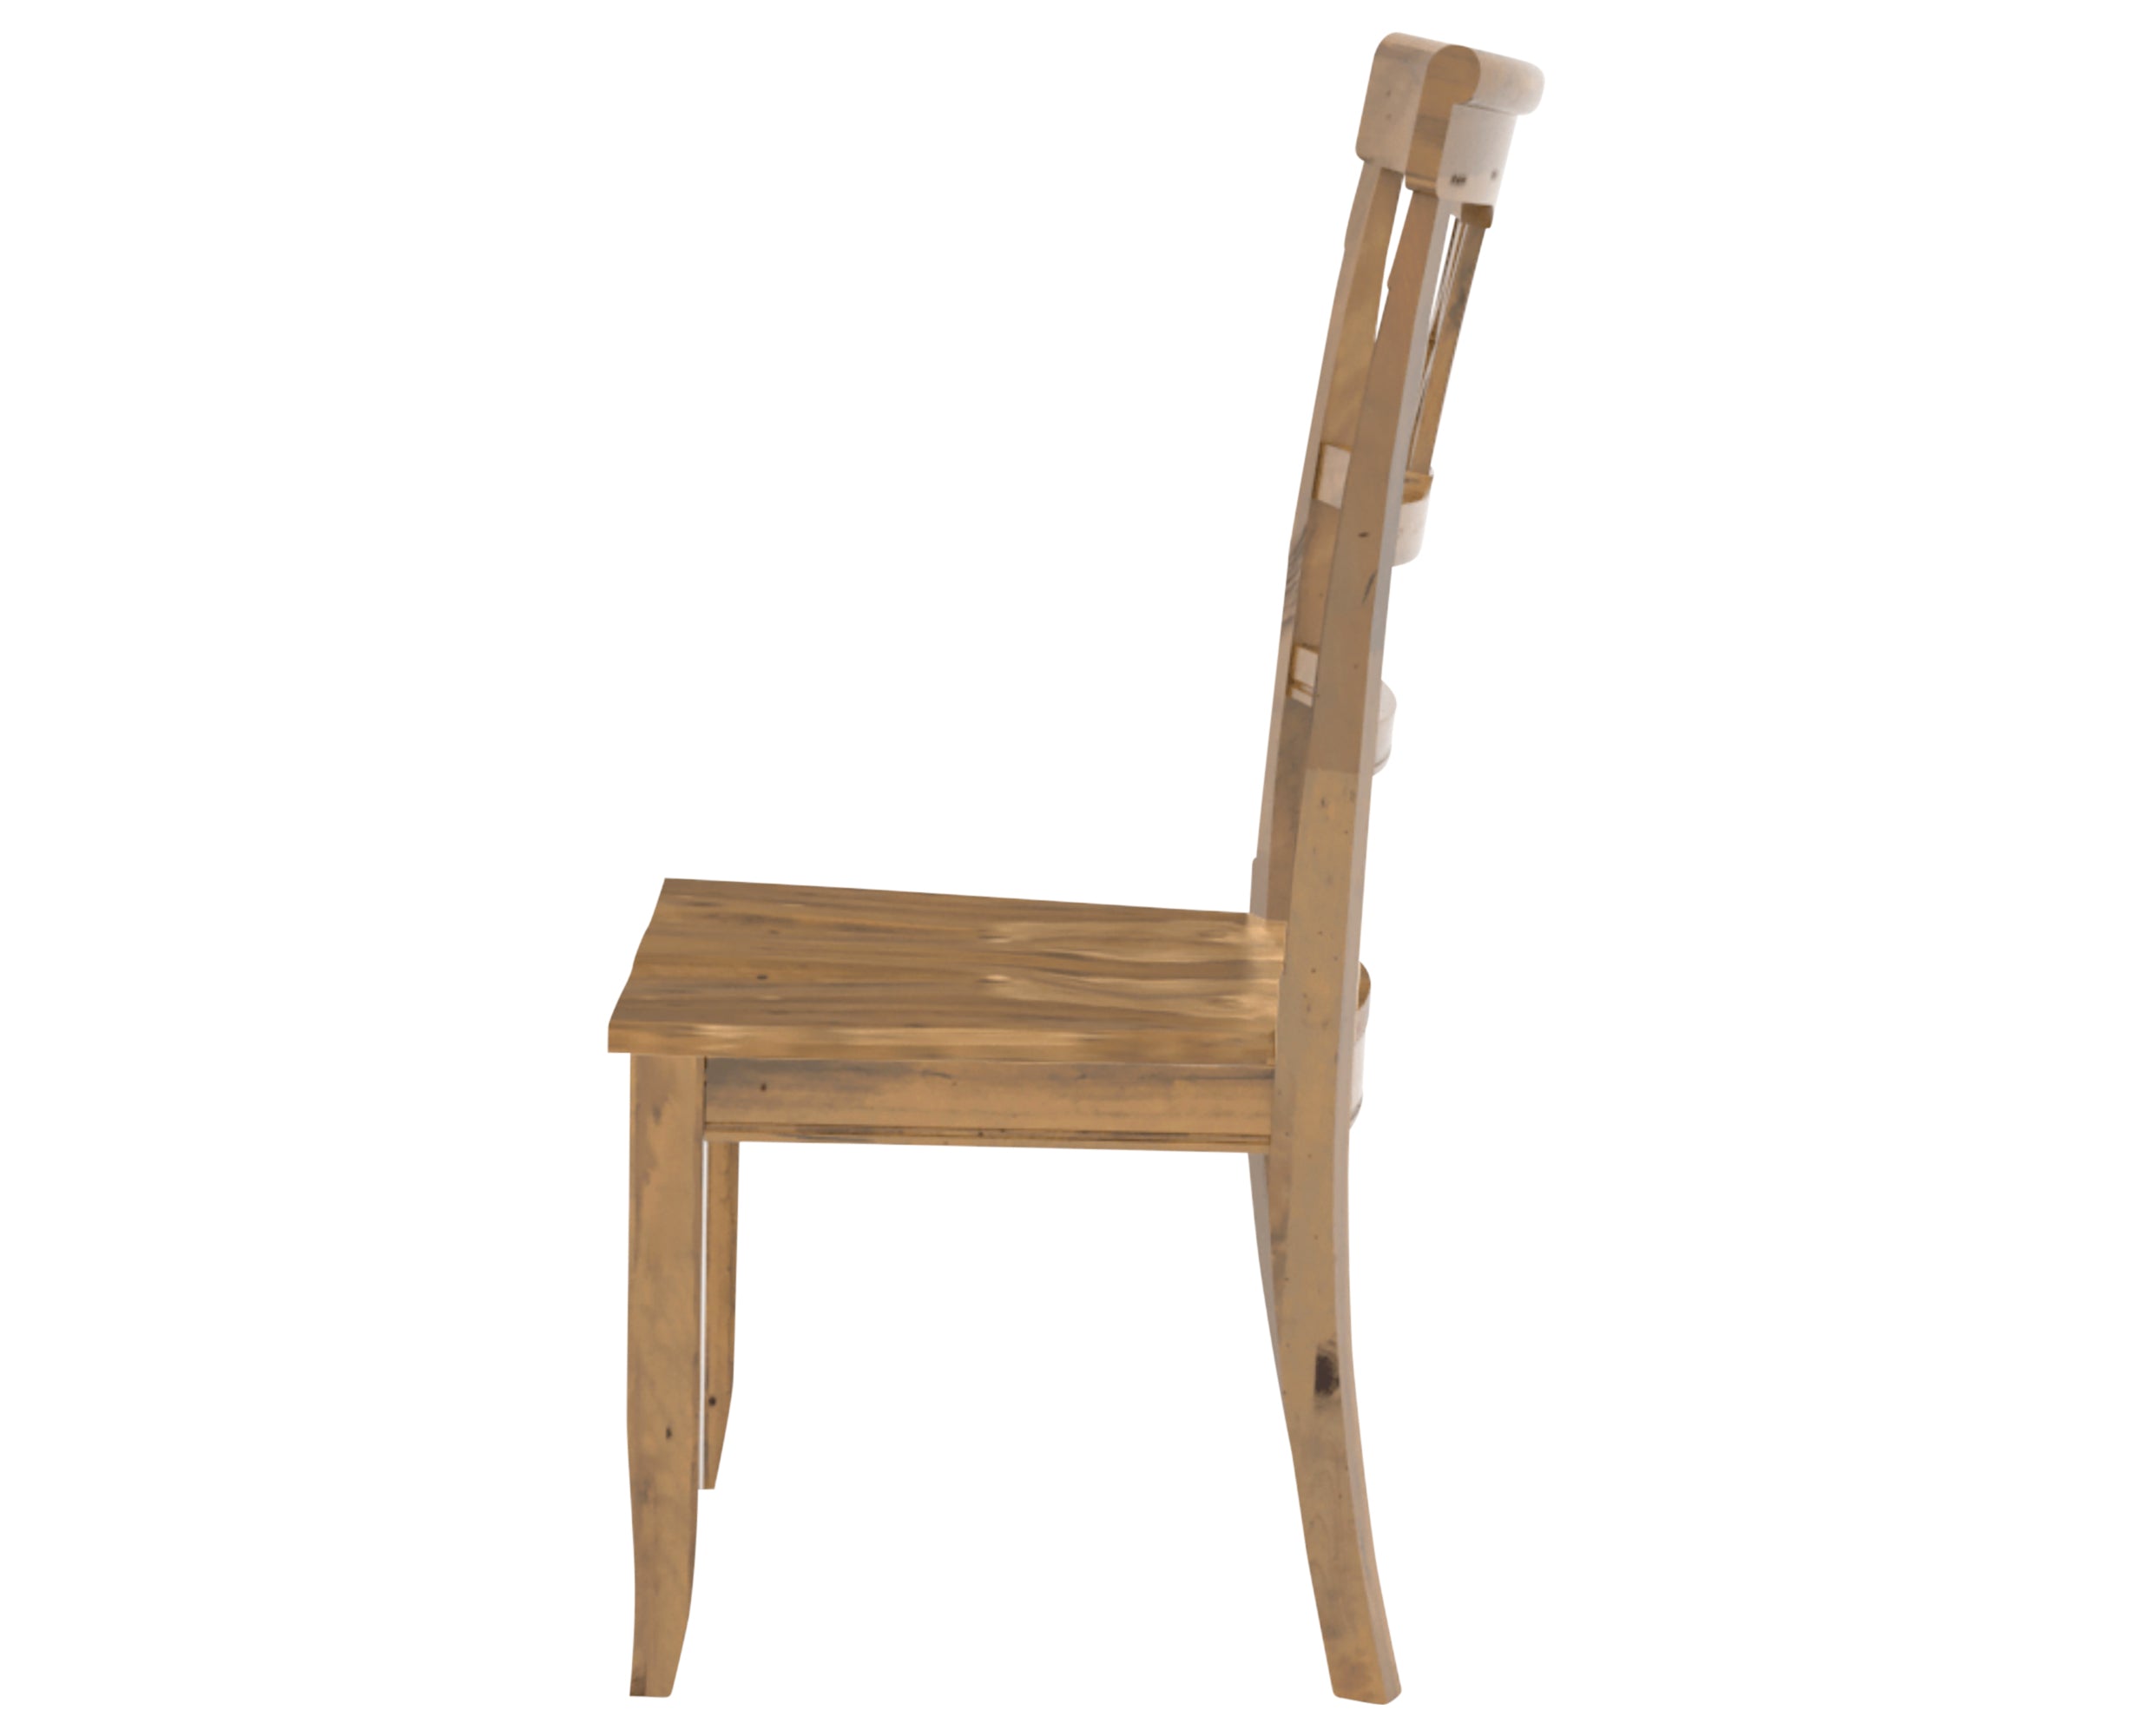 Oak Washed | Canadel Champlain Dining Chair 5181 | Valley Ridge Furniture